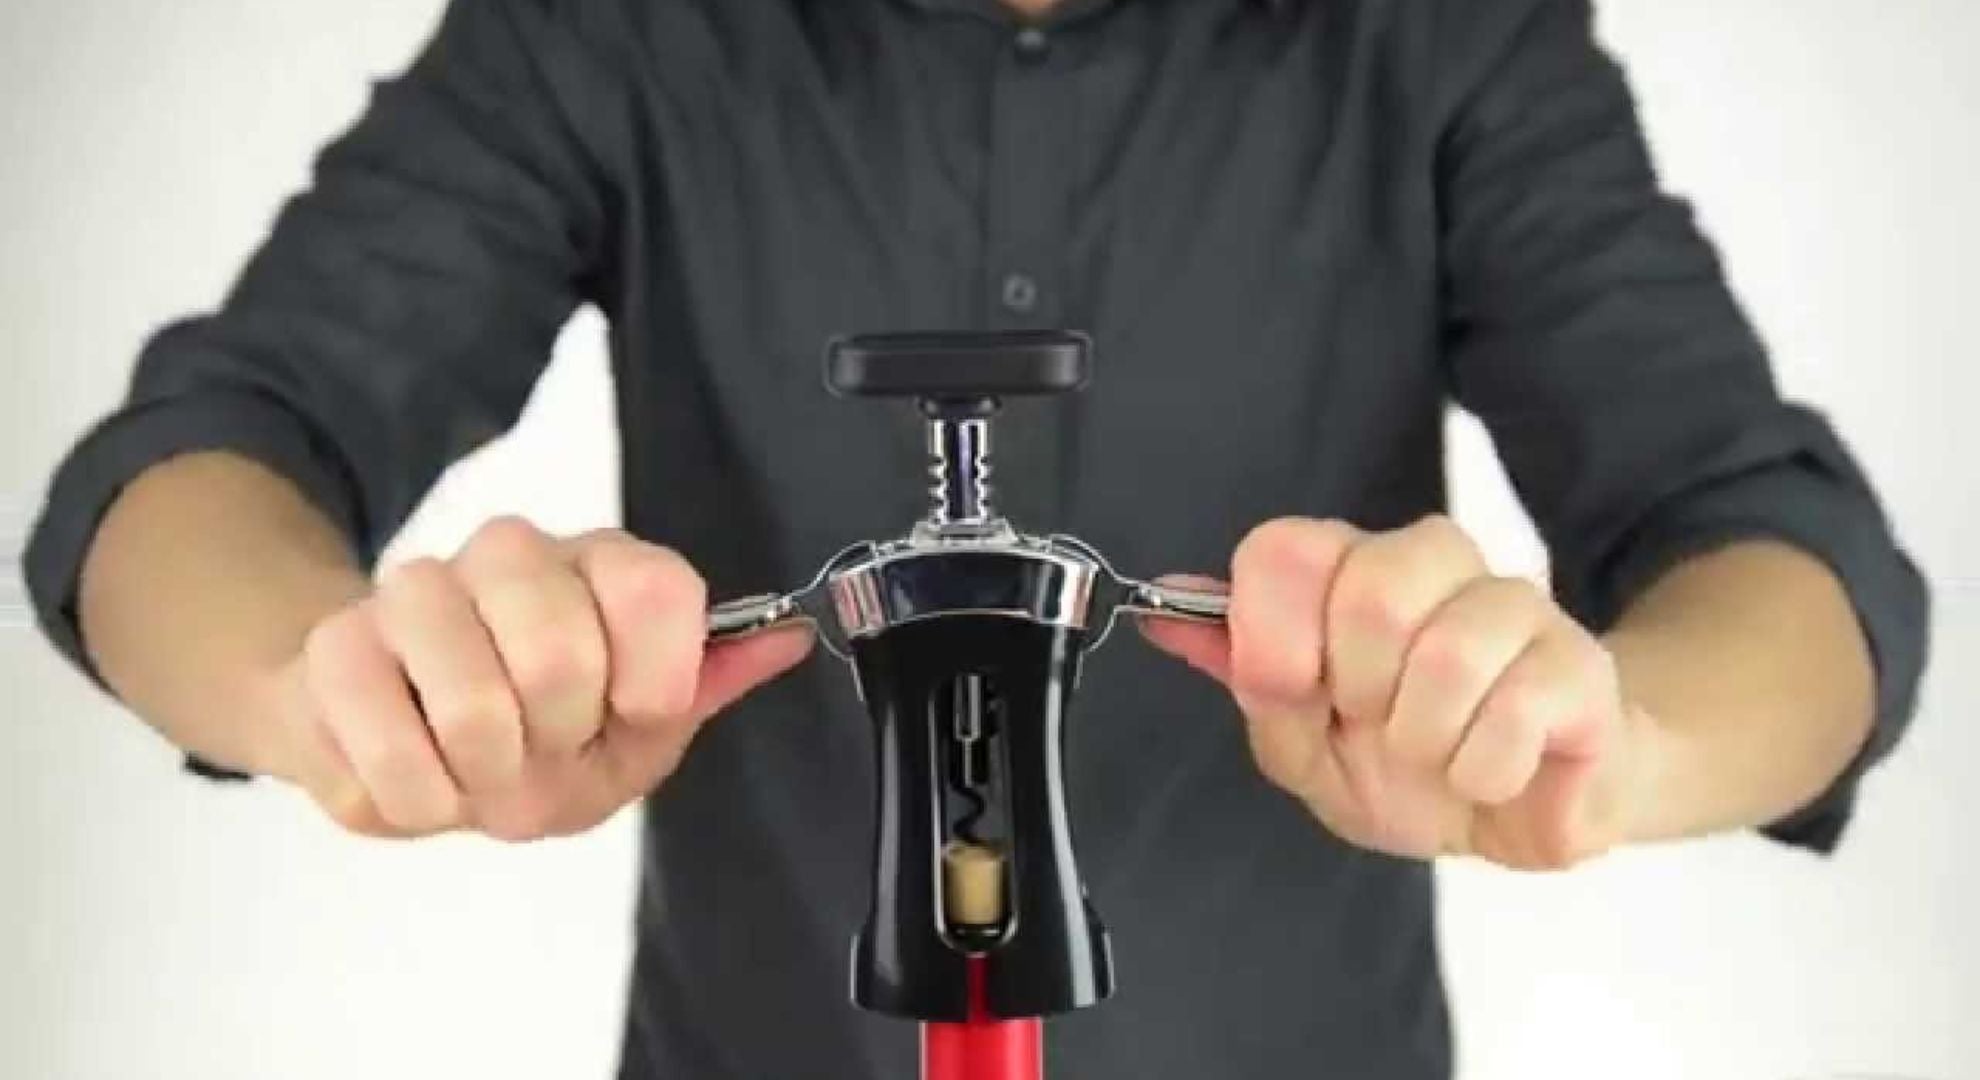 Complete Manual for Selecting the Ideal Wine Opener